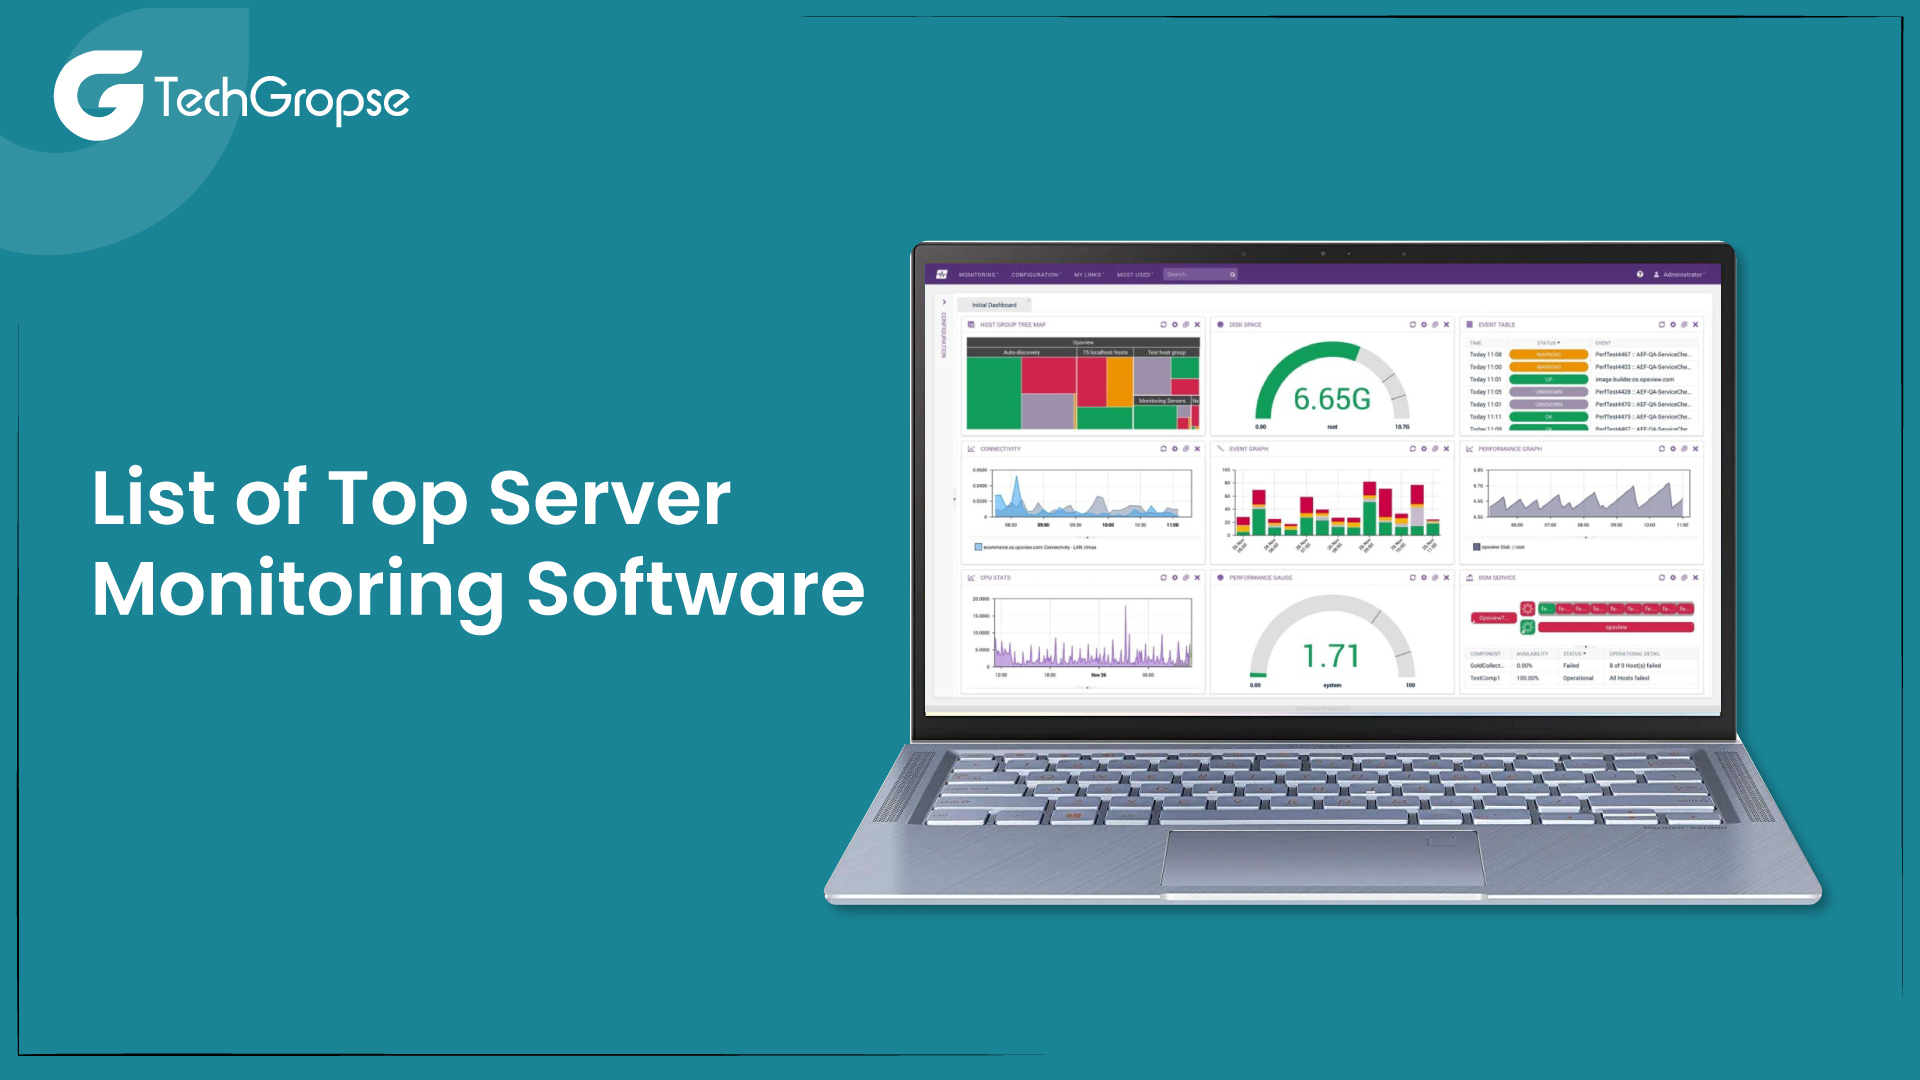 List of Top Server Monitoring Software